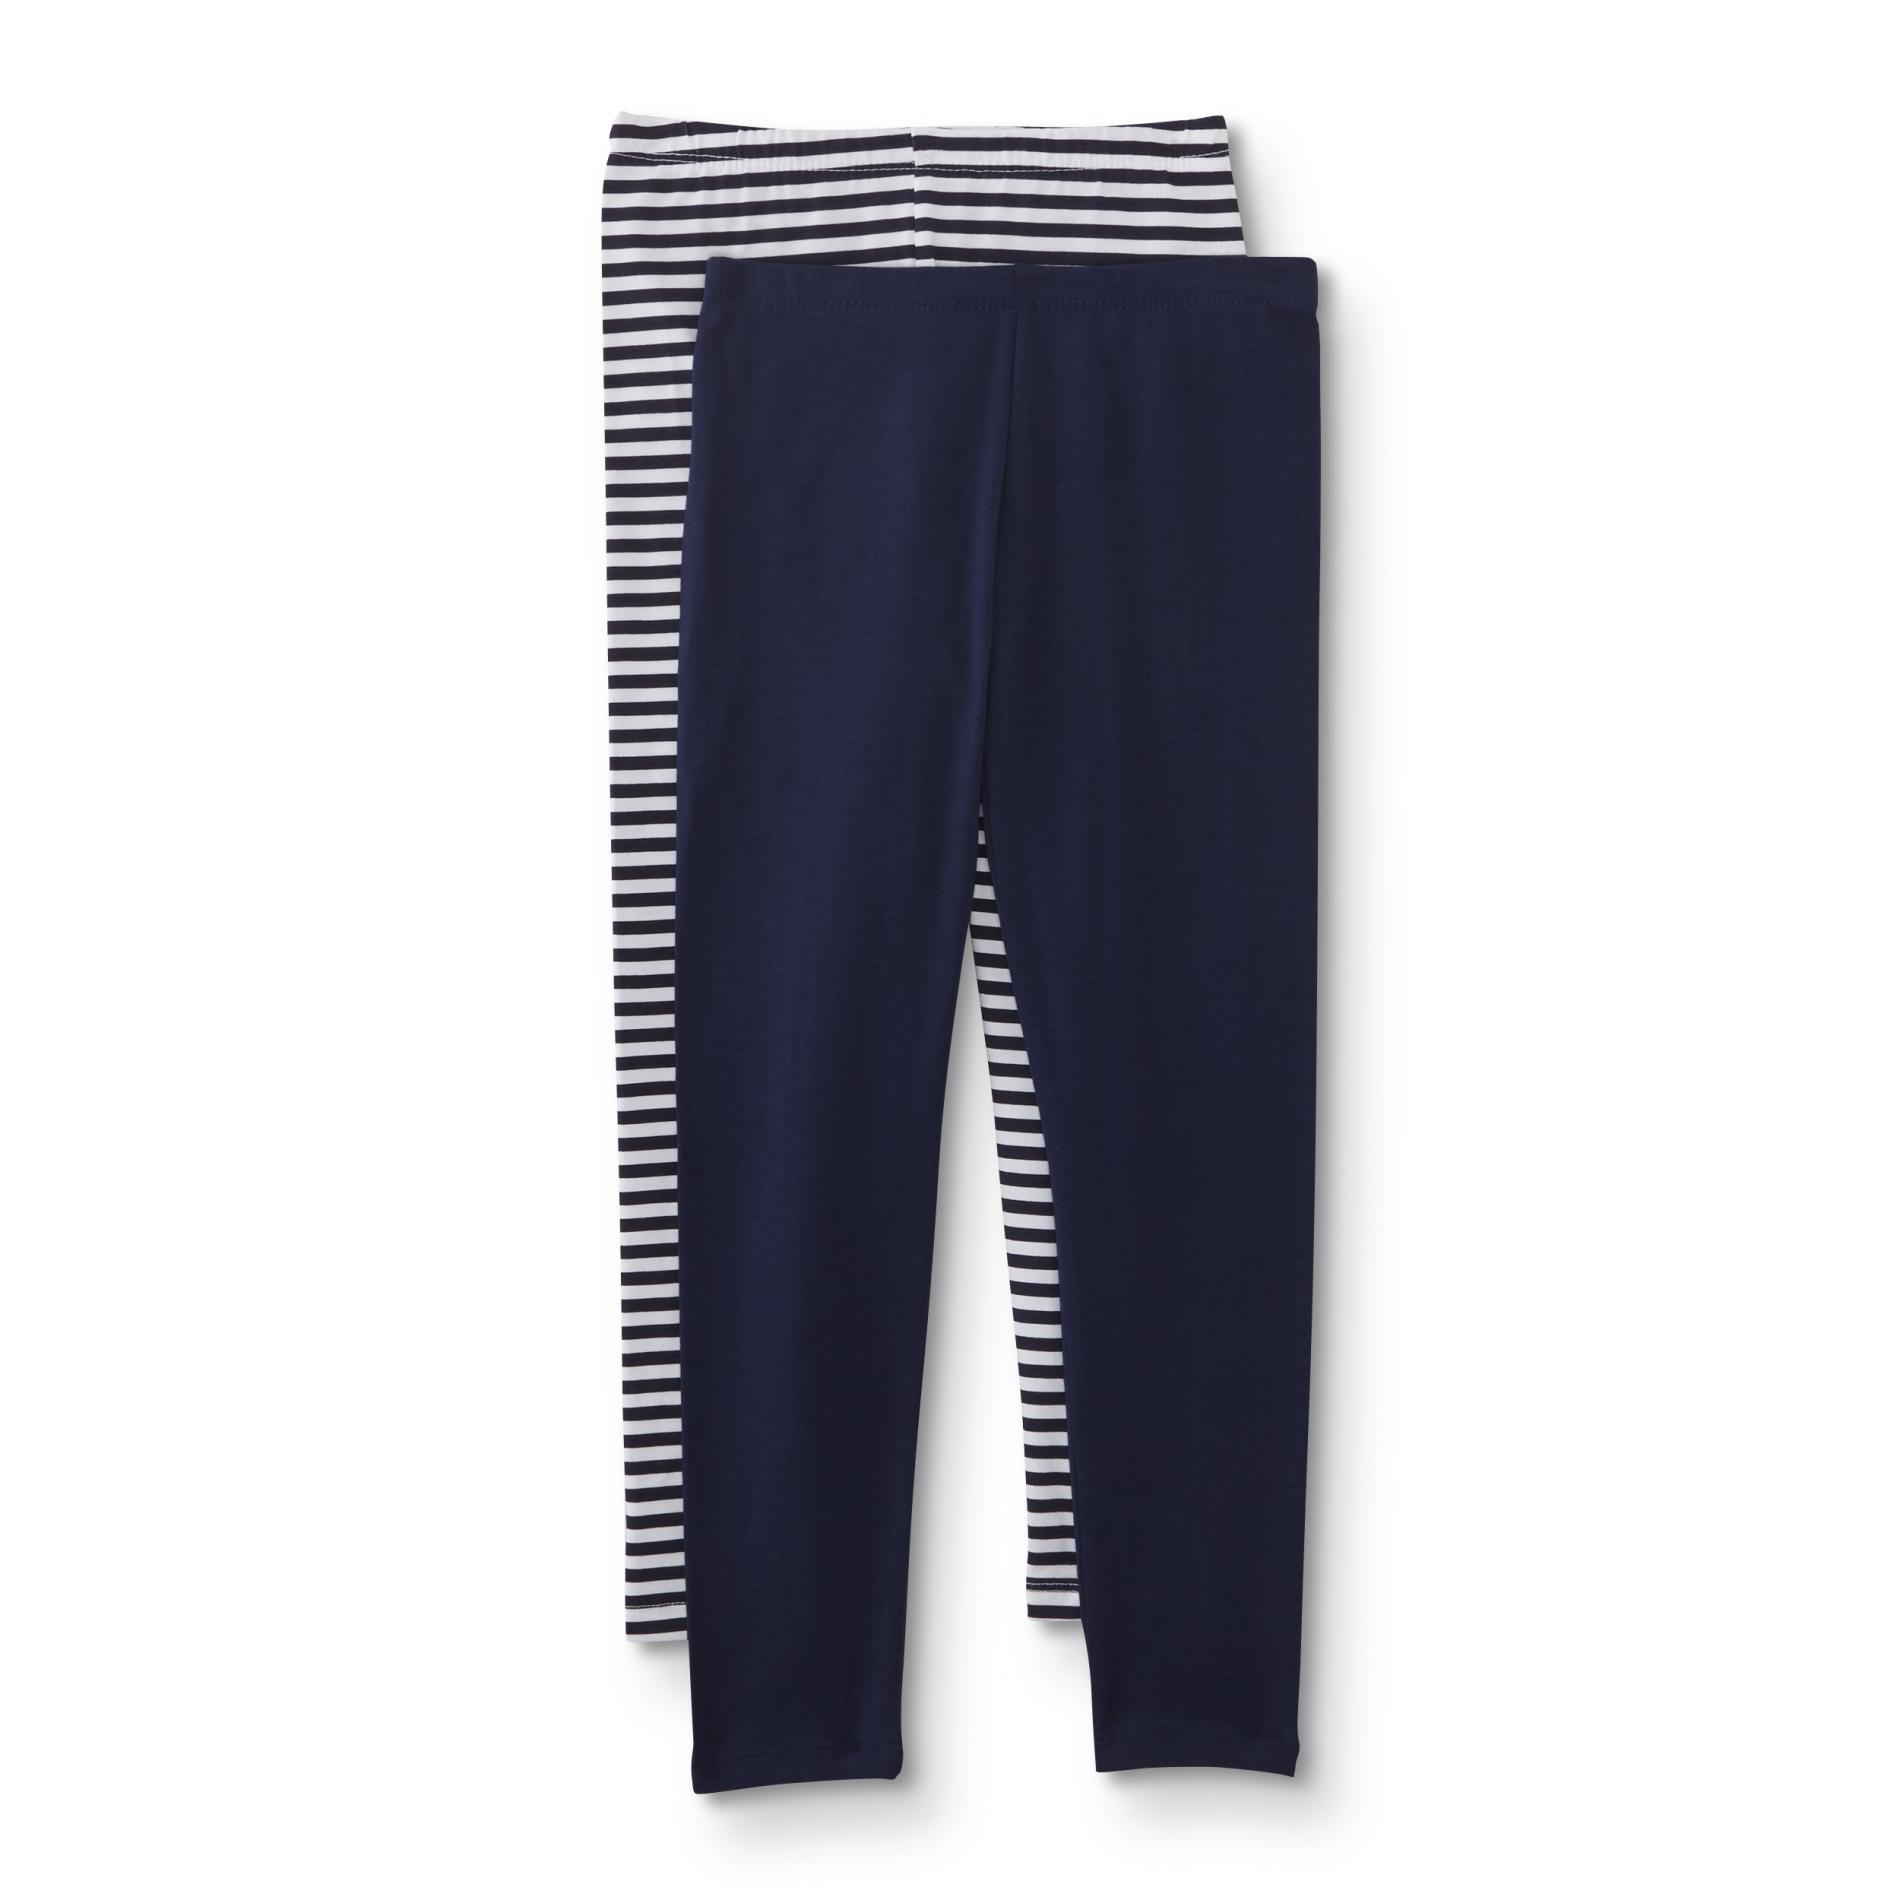 Simply Styled Girls' 2-Pack Leggings - Striped & Solid